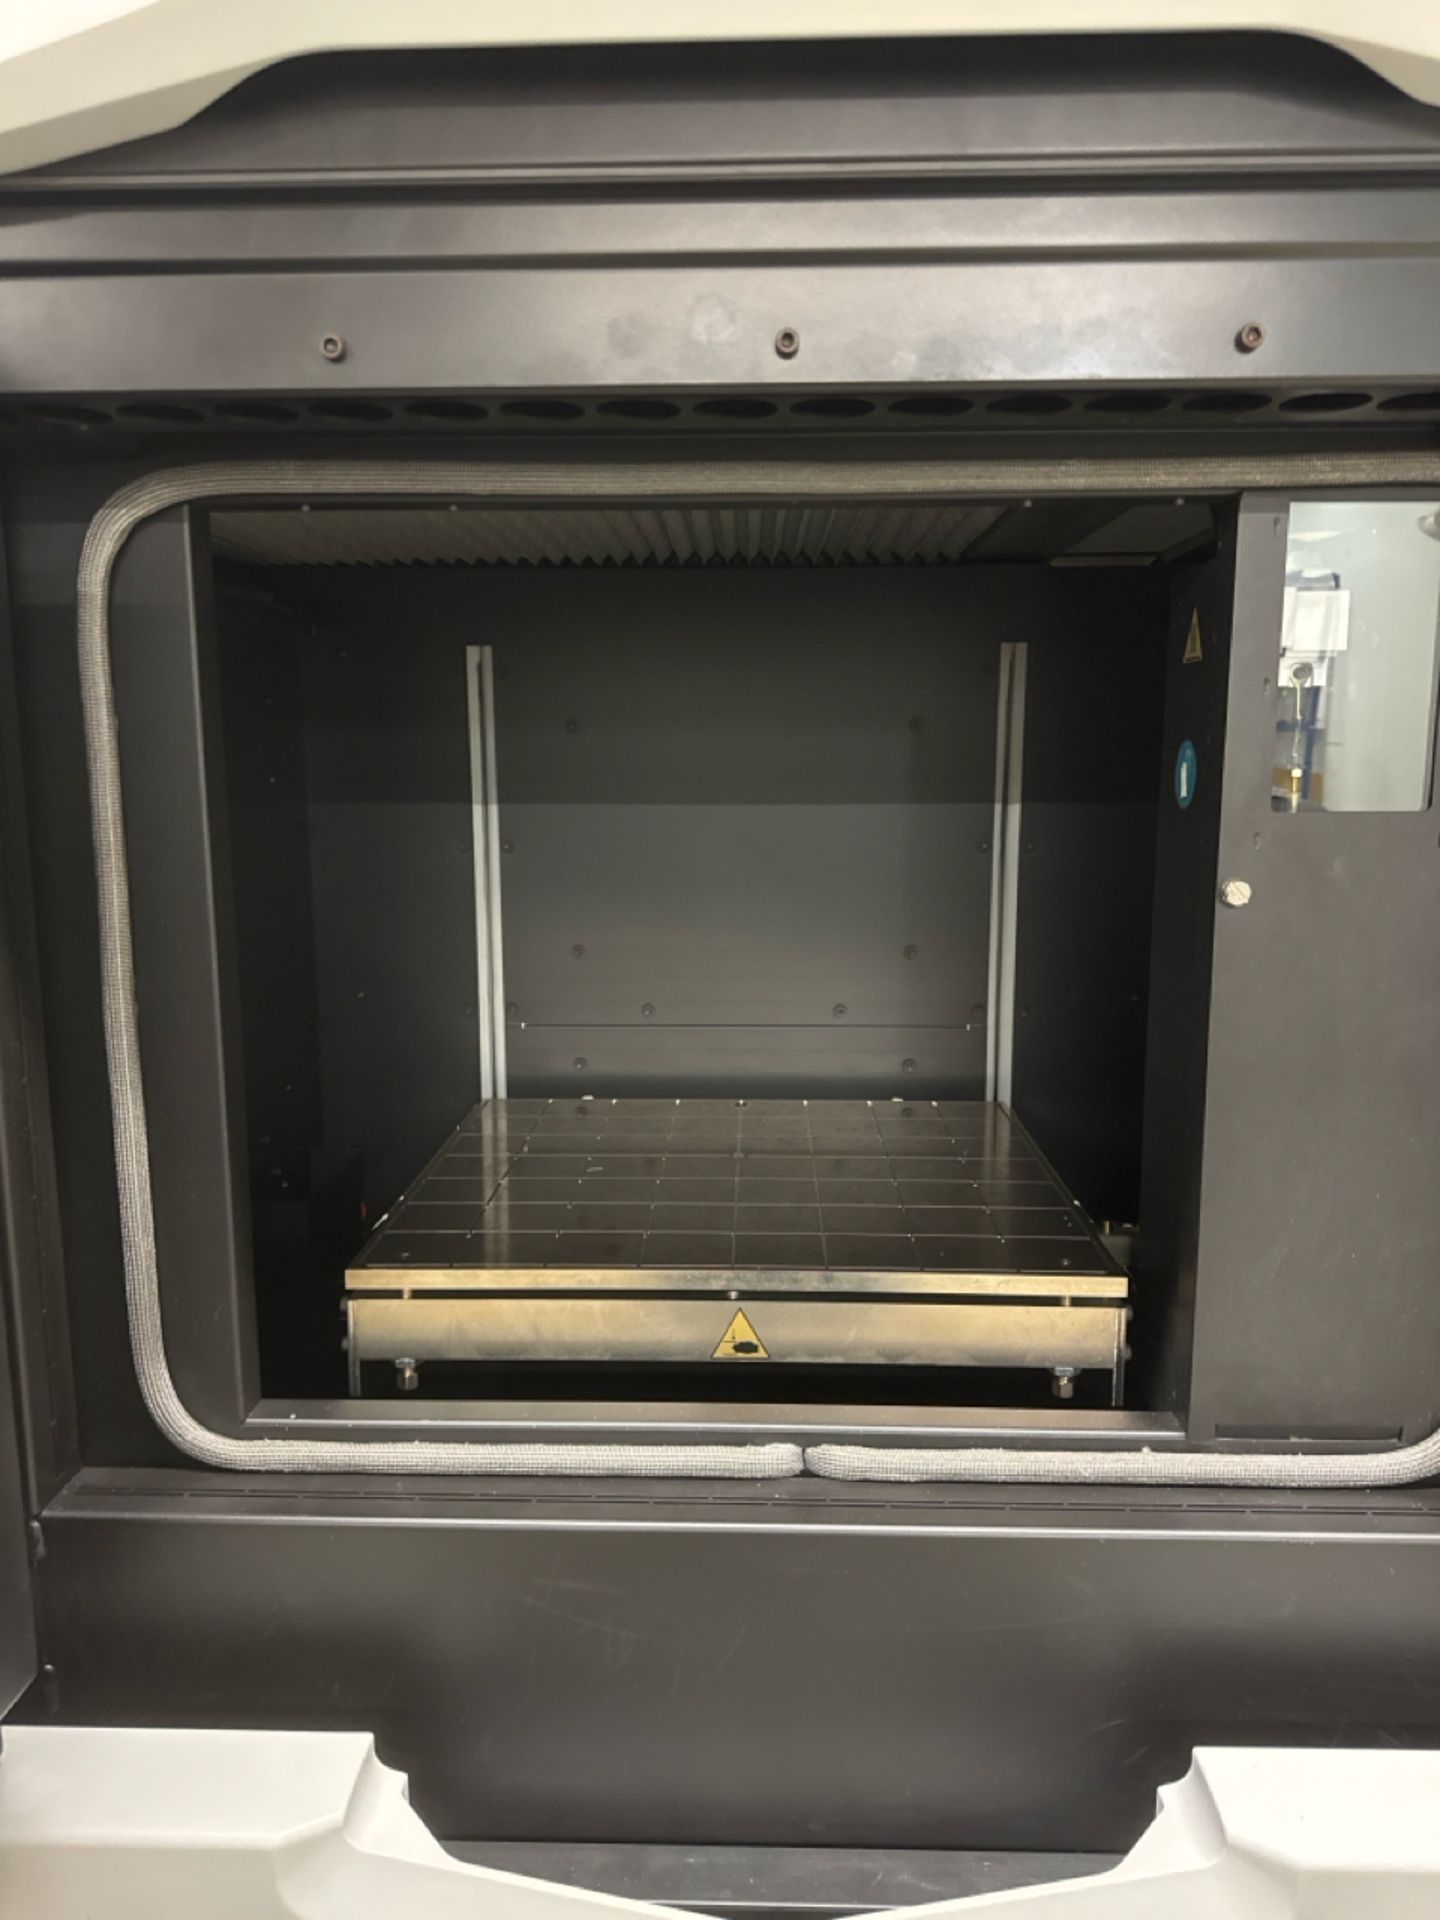 Stratasys Fortus 450mc 3D Production System Printer w/ Contents of Utility Cabinet - Image 2 of 17